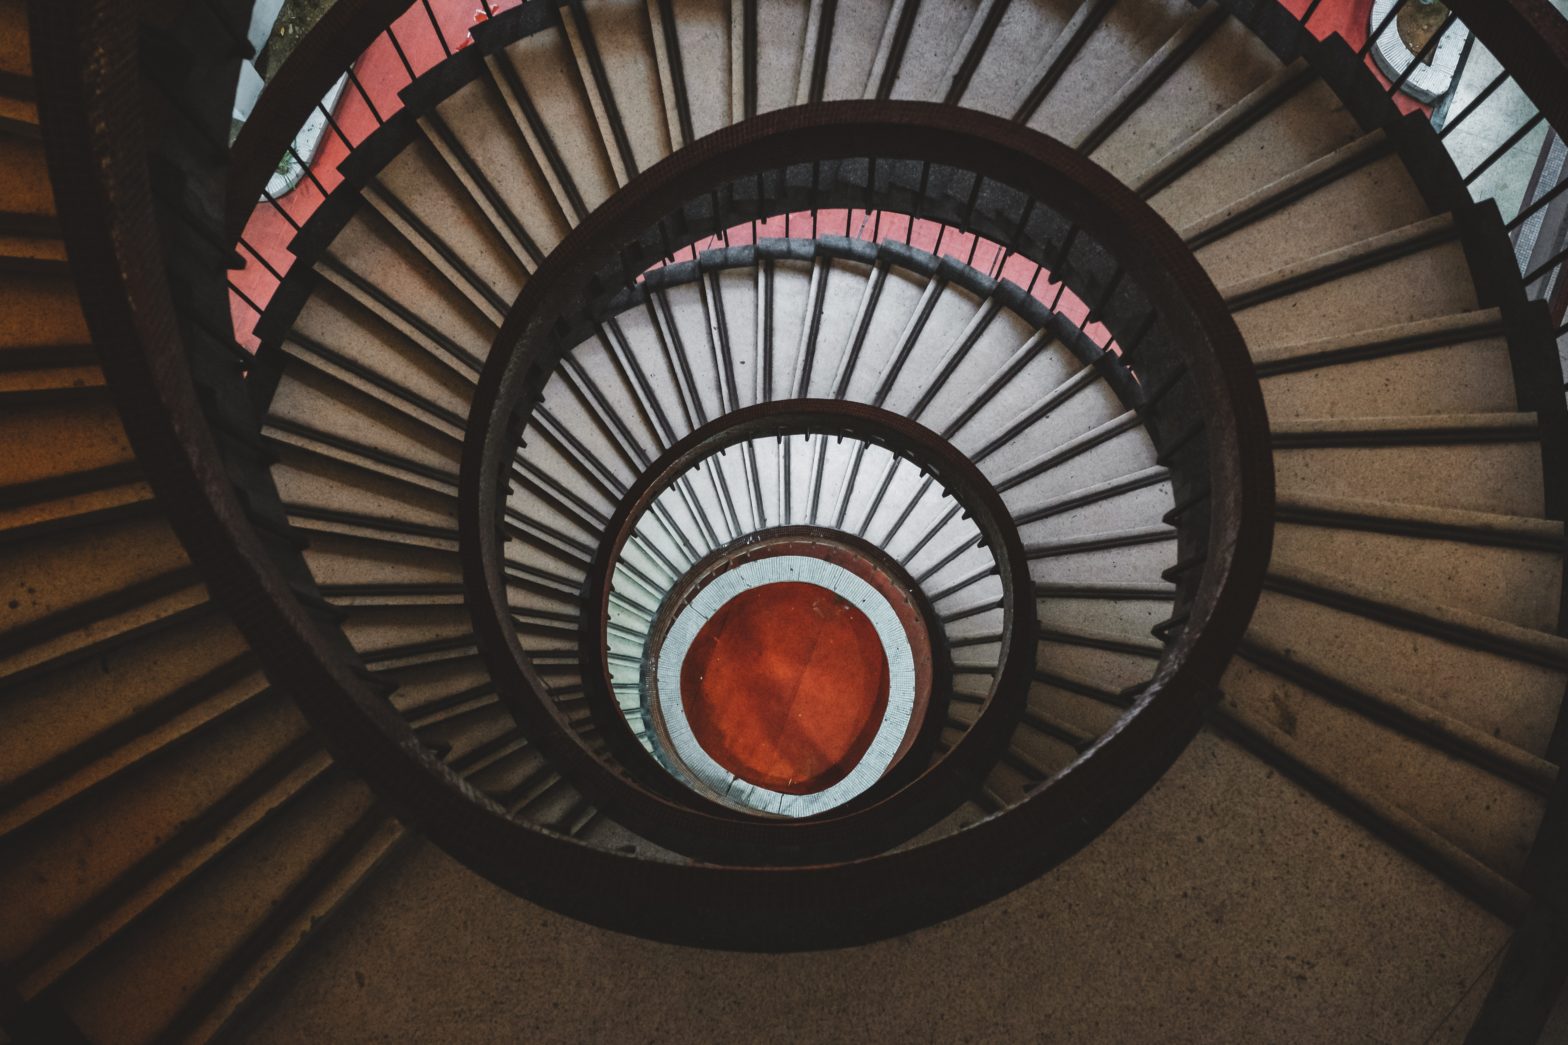 Day #13 – spiral staircase